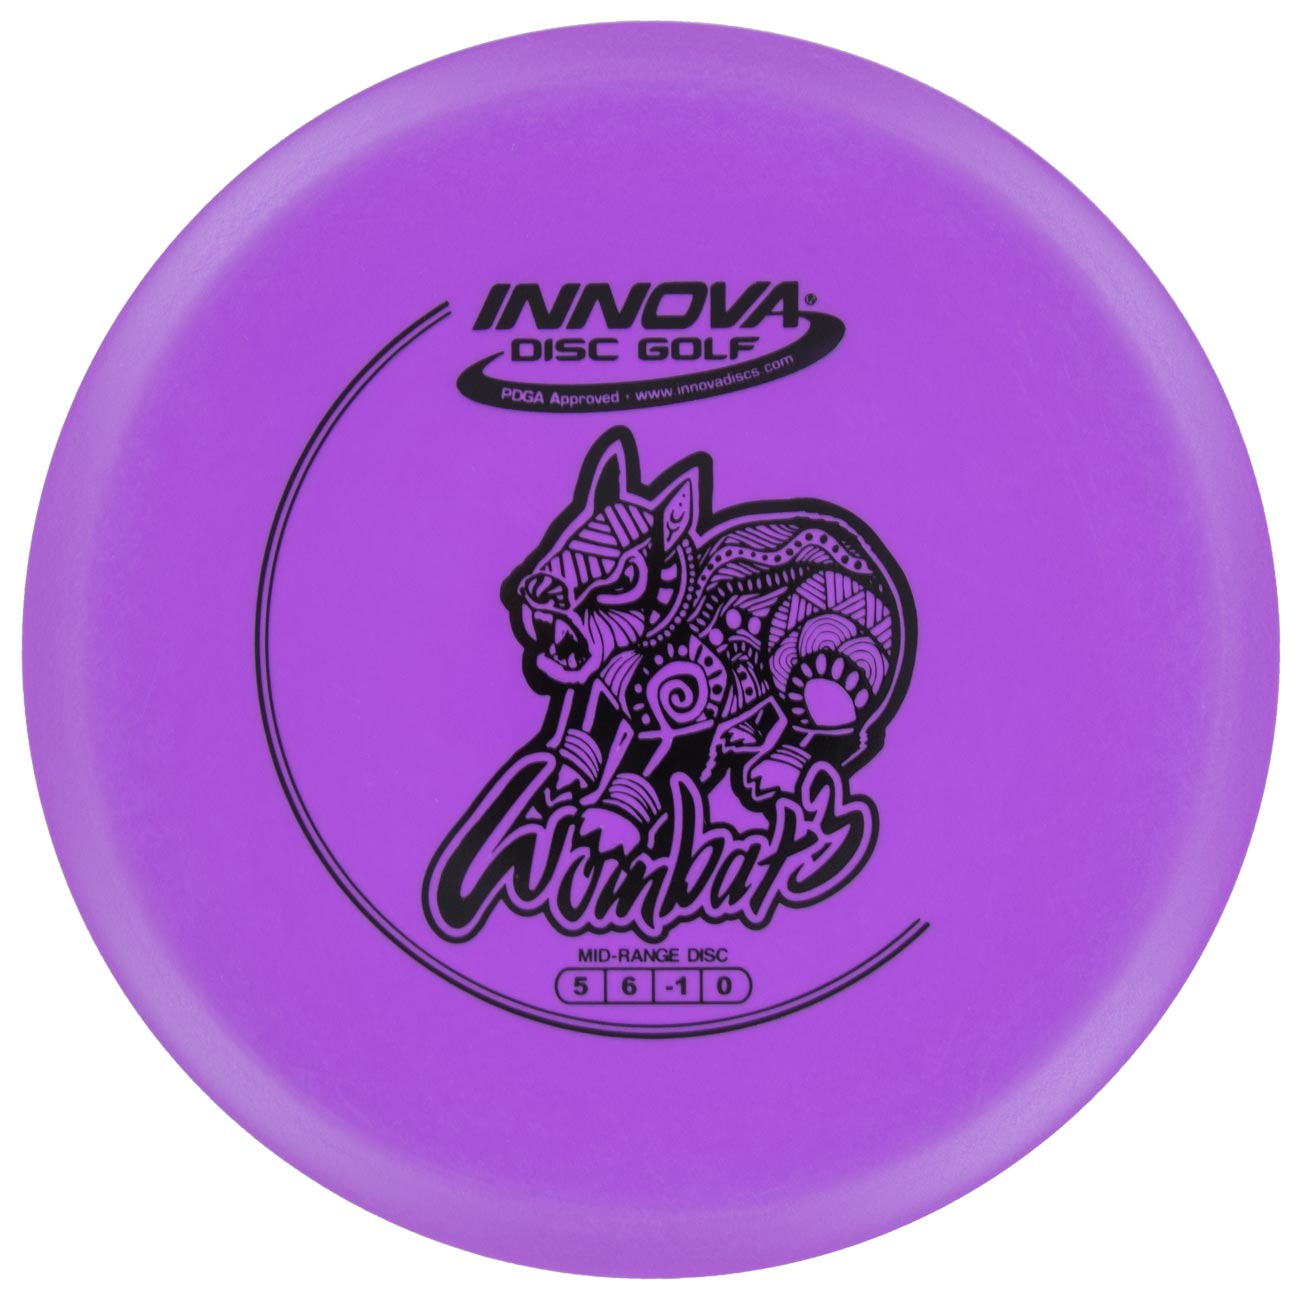 DX Wombat3 from Disc Golf United